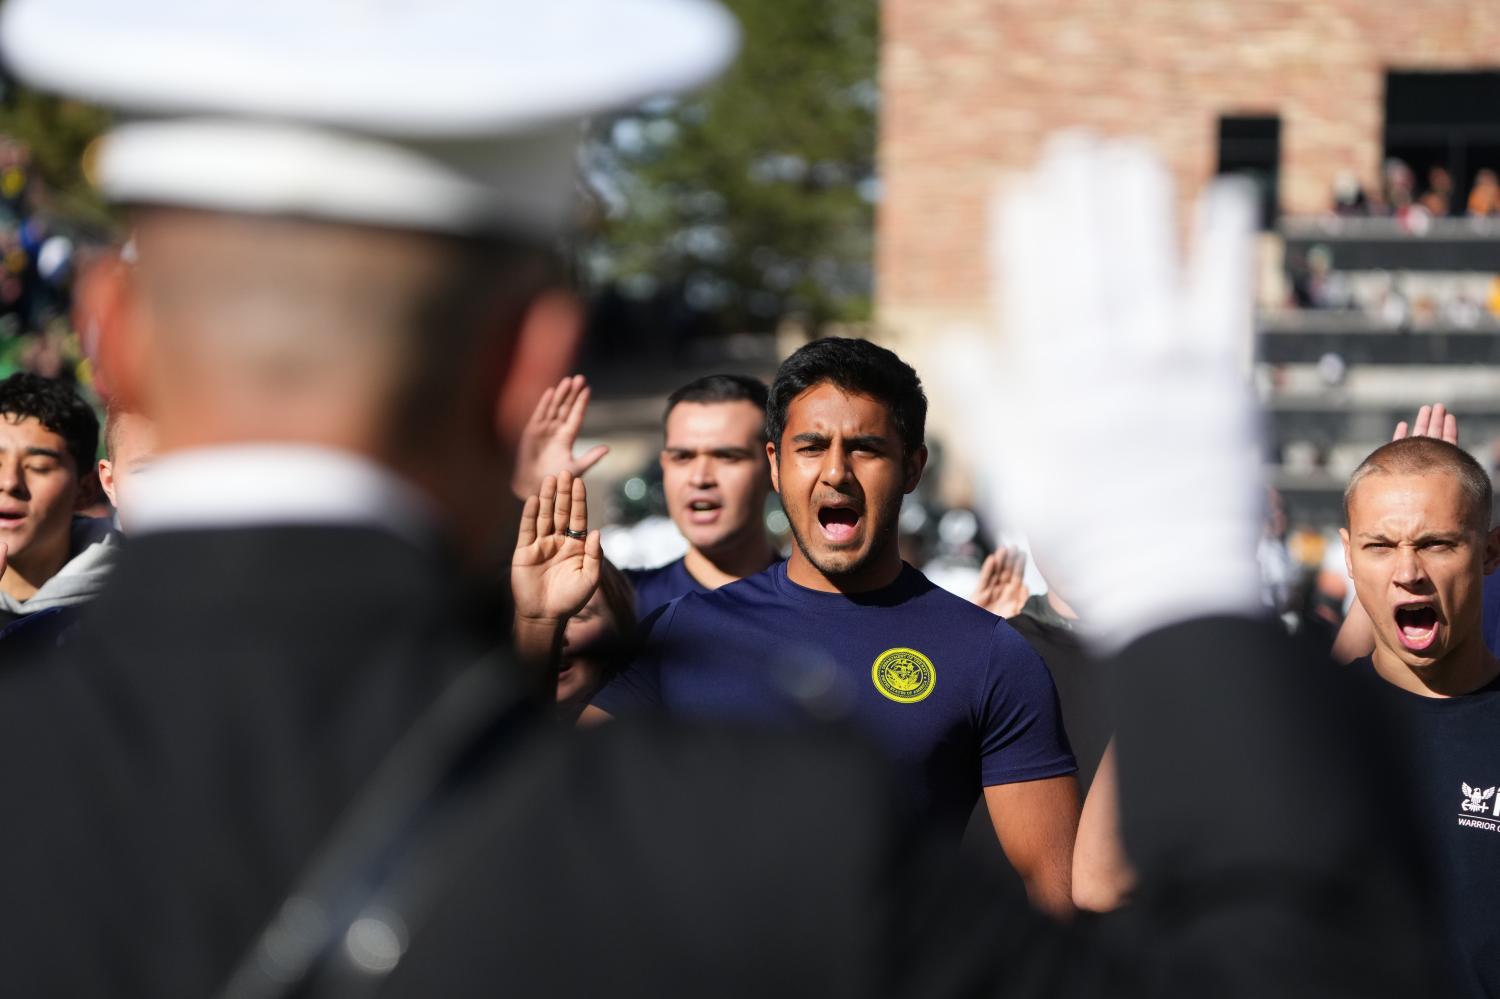 Nov 5, 2022; Boulder, Colorado, USA; United States military recruits are sworn in during the first half of the game against the Oregon Ducks against the Colorado Buffaloes at Folsom Field. Mandatory Credit: Ron Chenoy-USA TODAY Sports